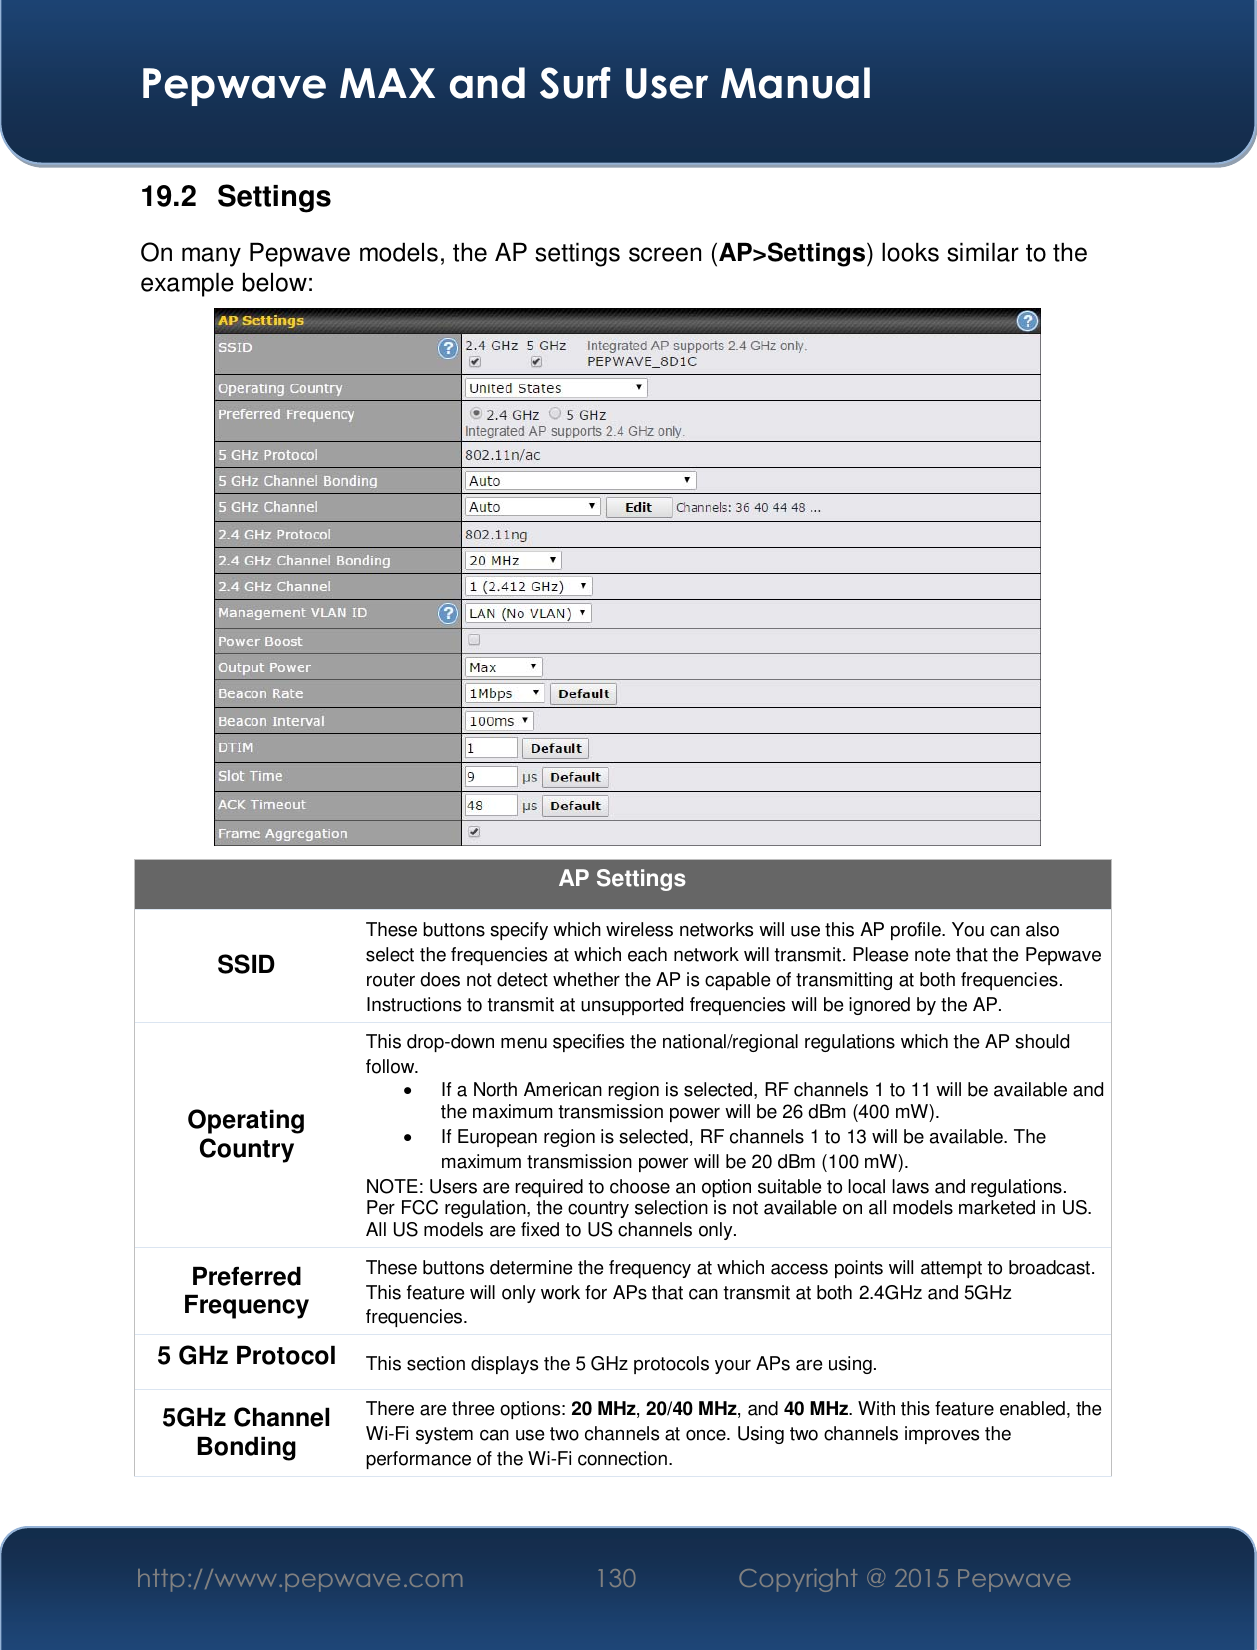  Pepwave MAX and Surf User Manual http://www.pepwave.com  130    Copyright @ 2015 Pepwave   19.2 Settings On many Pepwave models, the AP settings screen (AP&gt;Settings) looks similar to the example below:   AP Settings SSID These buttons specify which wireless networks will use this AP profile. You can also select the frequencies at which each network will transmit. Please note that the Pepwave router does not detect whether the AP is capable of transmitting at both frequencies. Instructions to transmit at unsupported frequencies will be ignored by the AP. Operating Country This drop-down menu specifies the national/regional regulations which the AP should follow.   x  If a North American region is selected, RF channels 1 to 11 will be available and the maximum transmission power will be 26 dBm (400 mW).   x  If European region is selected, RF channels 1 to 13 will be available. The maximum transmission power will be 20 dBm (100 mW). NOTE: Users are required to choose an option suitable to local laws and regulations. Per FCC regulation, the country selection is not available on all models marketed in US. All US models are fixed to US channels only. Preferred Frequency These buttons determine the frequency at which access points will attempt to broadcast. This feature will only work for APs that can transmit at both 2.4GHz and 5GHz frequencies. 5 GHz Protocol  This section displays the 5 GHz protocols your APs are using. 5GHz Channel Bonding There are three options: 20 MHz, 20/40 MHz, and 40 MHz. With this feature enabled, the Wi-Fi system can use two channels at once. Using two channels improves the performance of the Wi-Fi connection.  